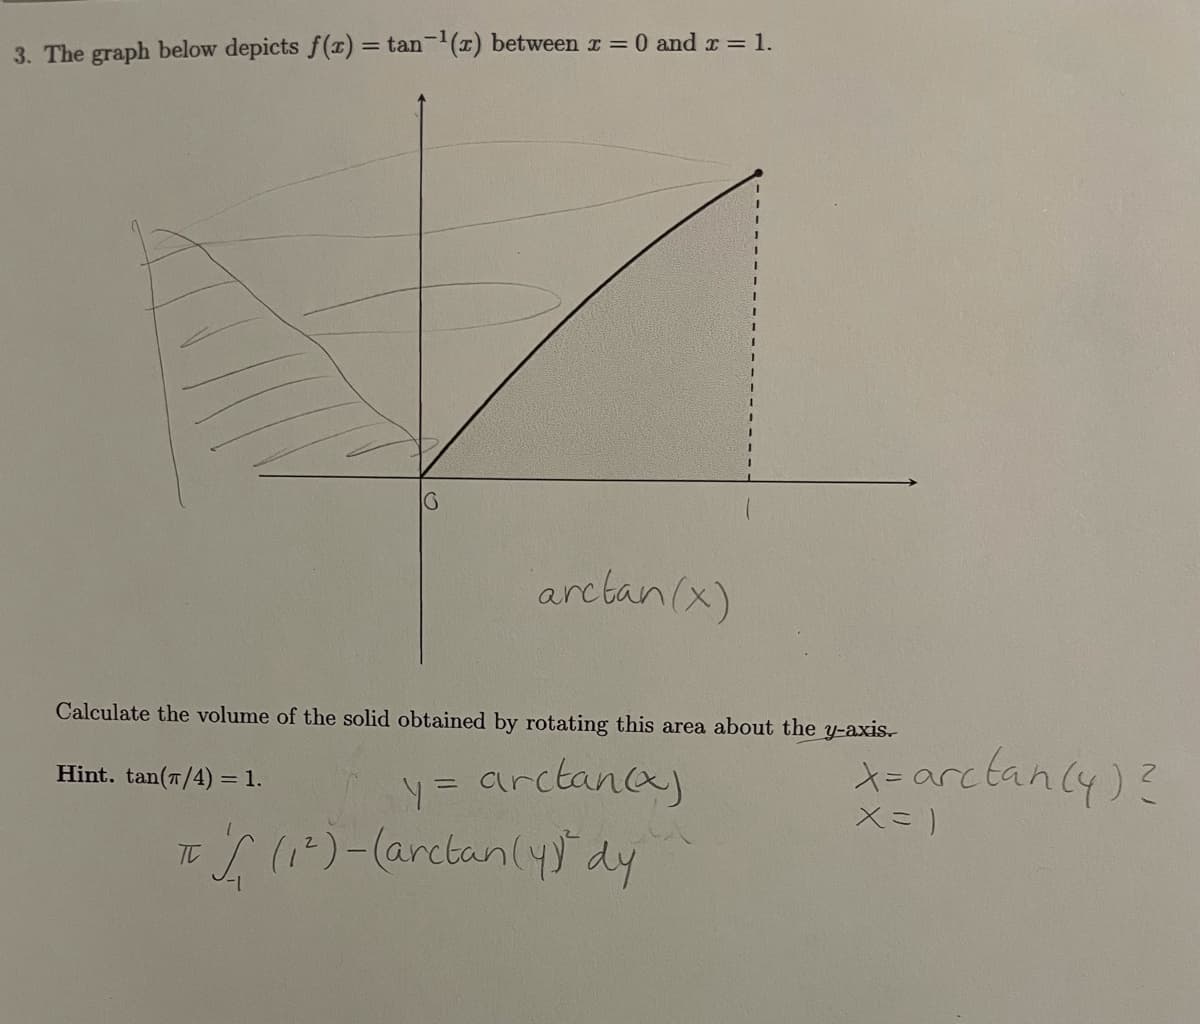 3. The graph below depicts f(x) = tan-'(x) between r = 0 and r = 1.
arctan(x)
Calculate the volume of the solid obtained by rotating this area about the y-axis.
arctanca
*-arctanly)?
Hint. tan(7/4) = 1.
ToI ()-(arctan(yy" dy
